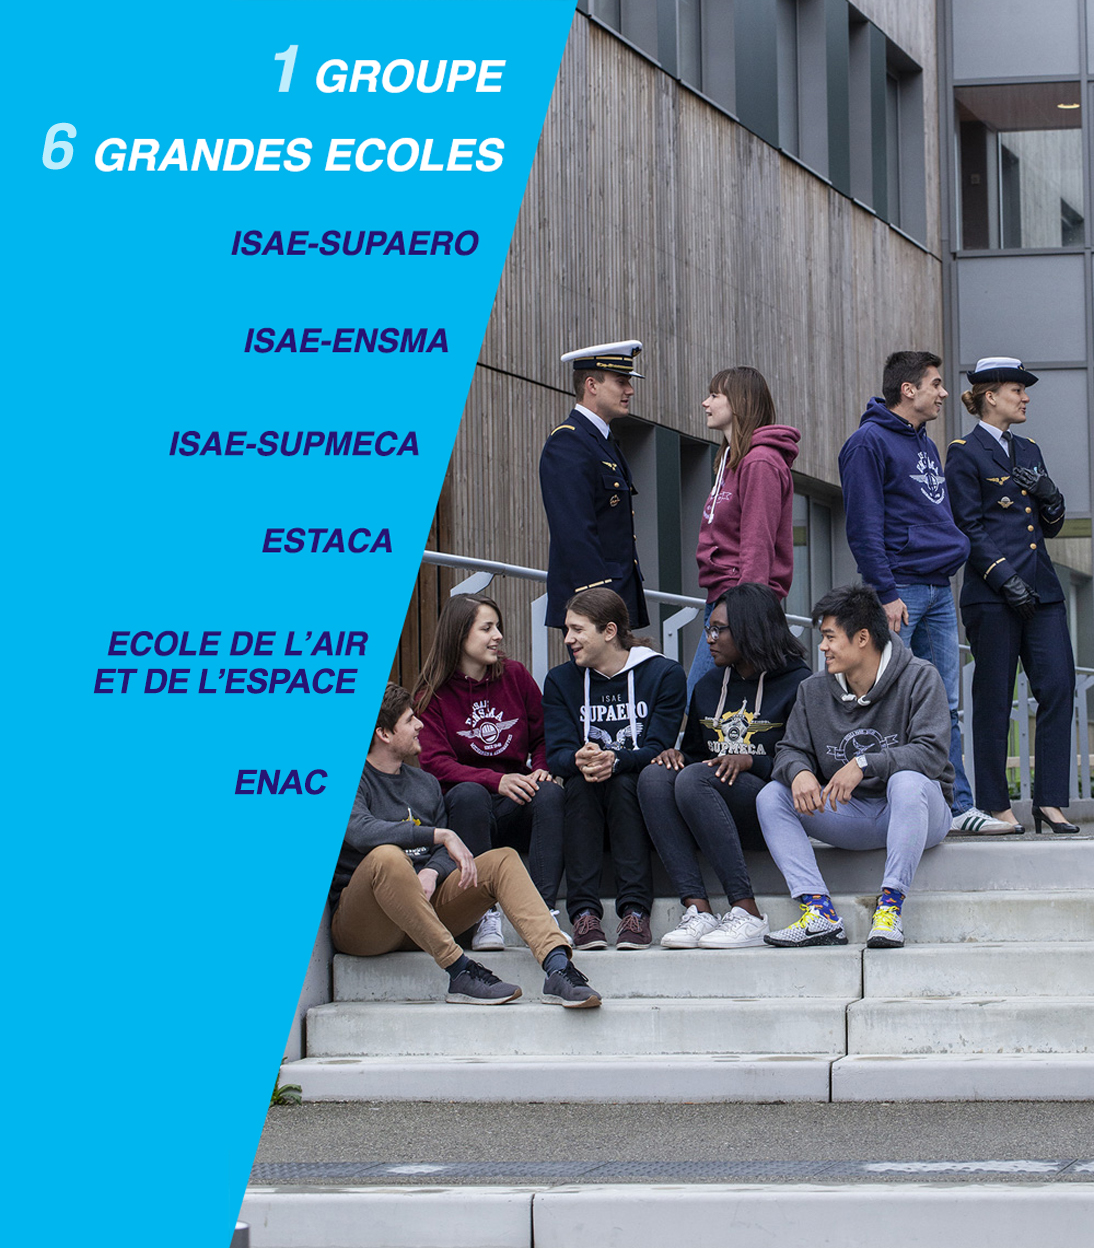 Groupe ISAE 6 grandes écoles